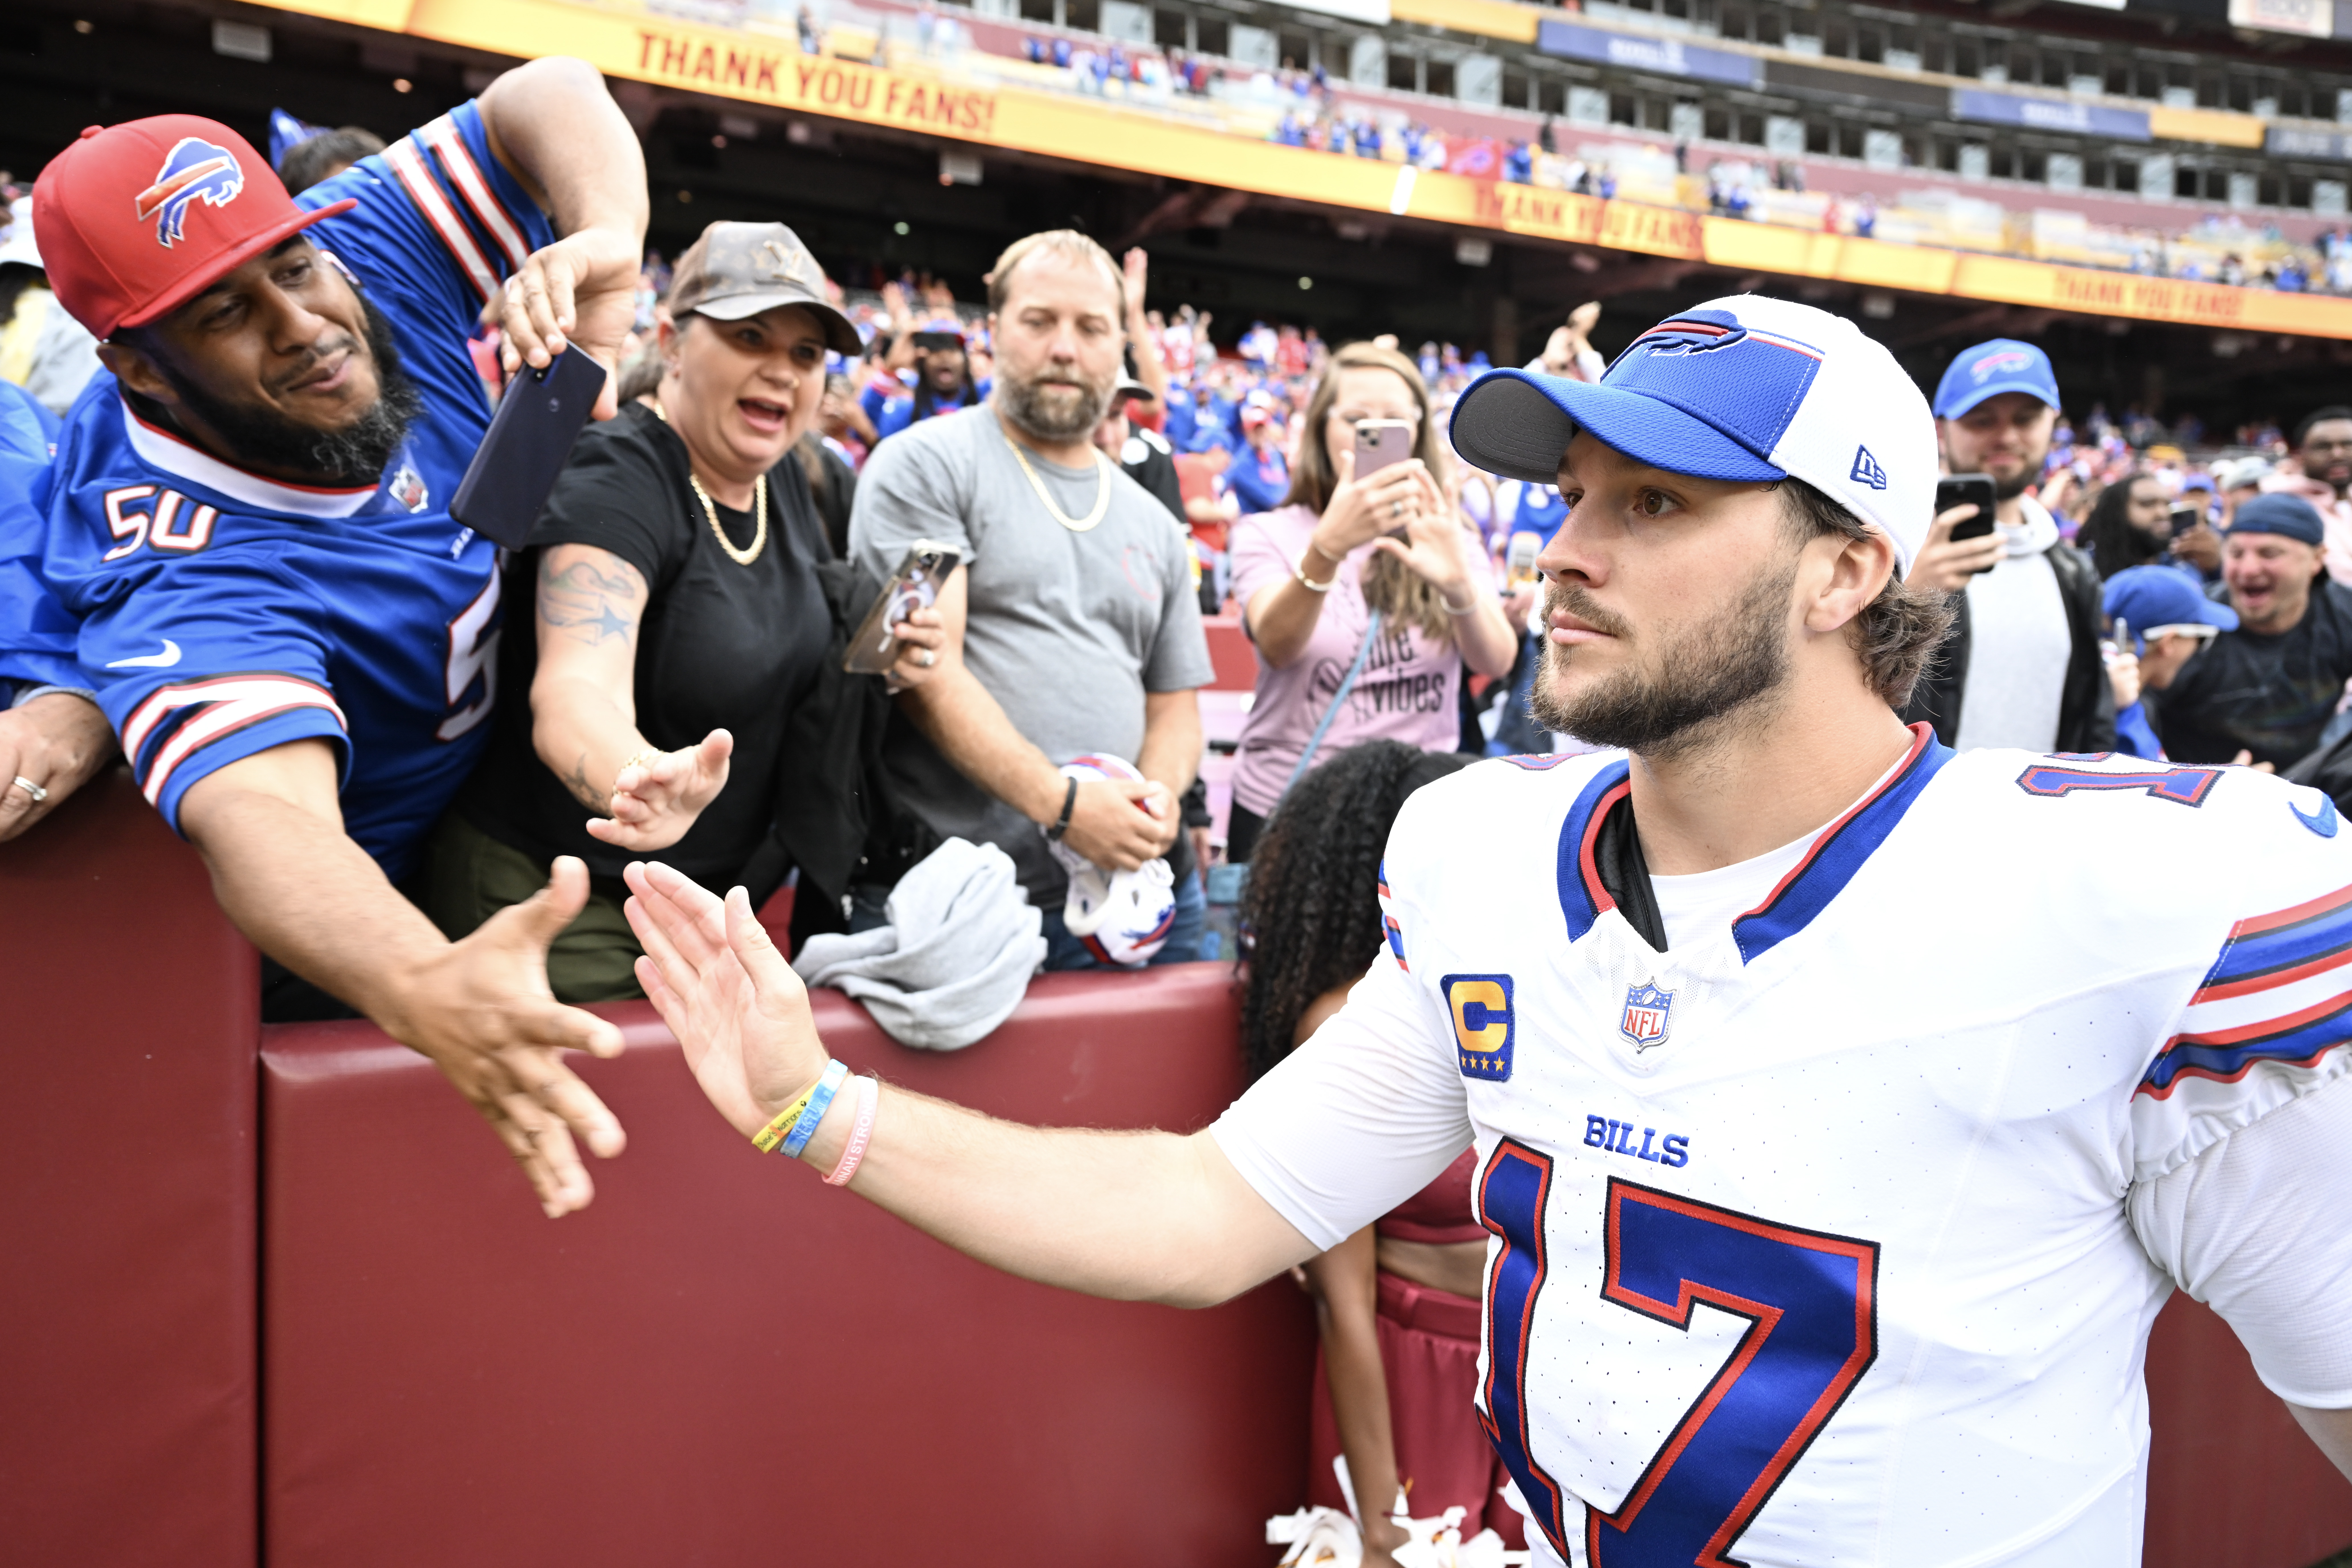 Bills Mafia recognized by players: ‘Seeing them celebrate was amazing’